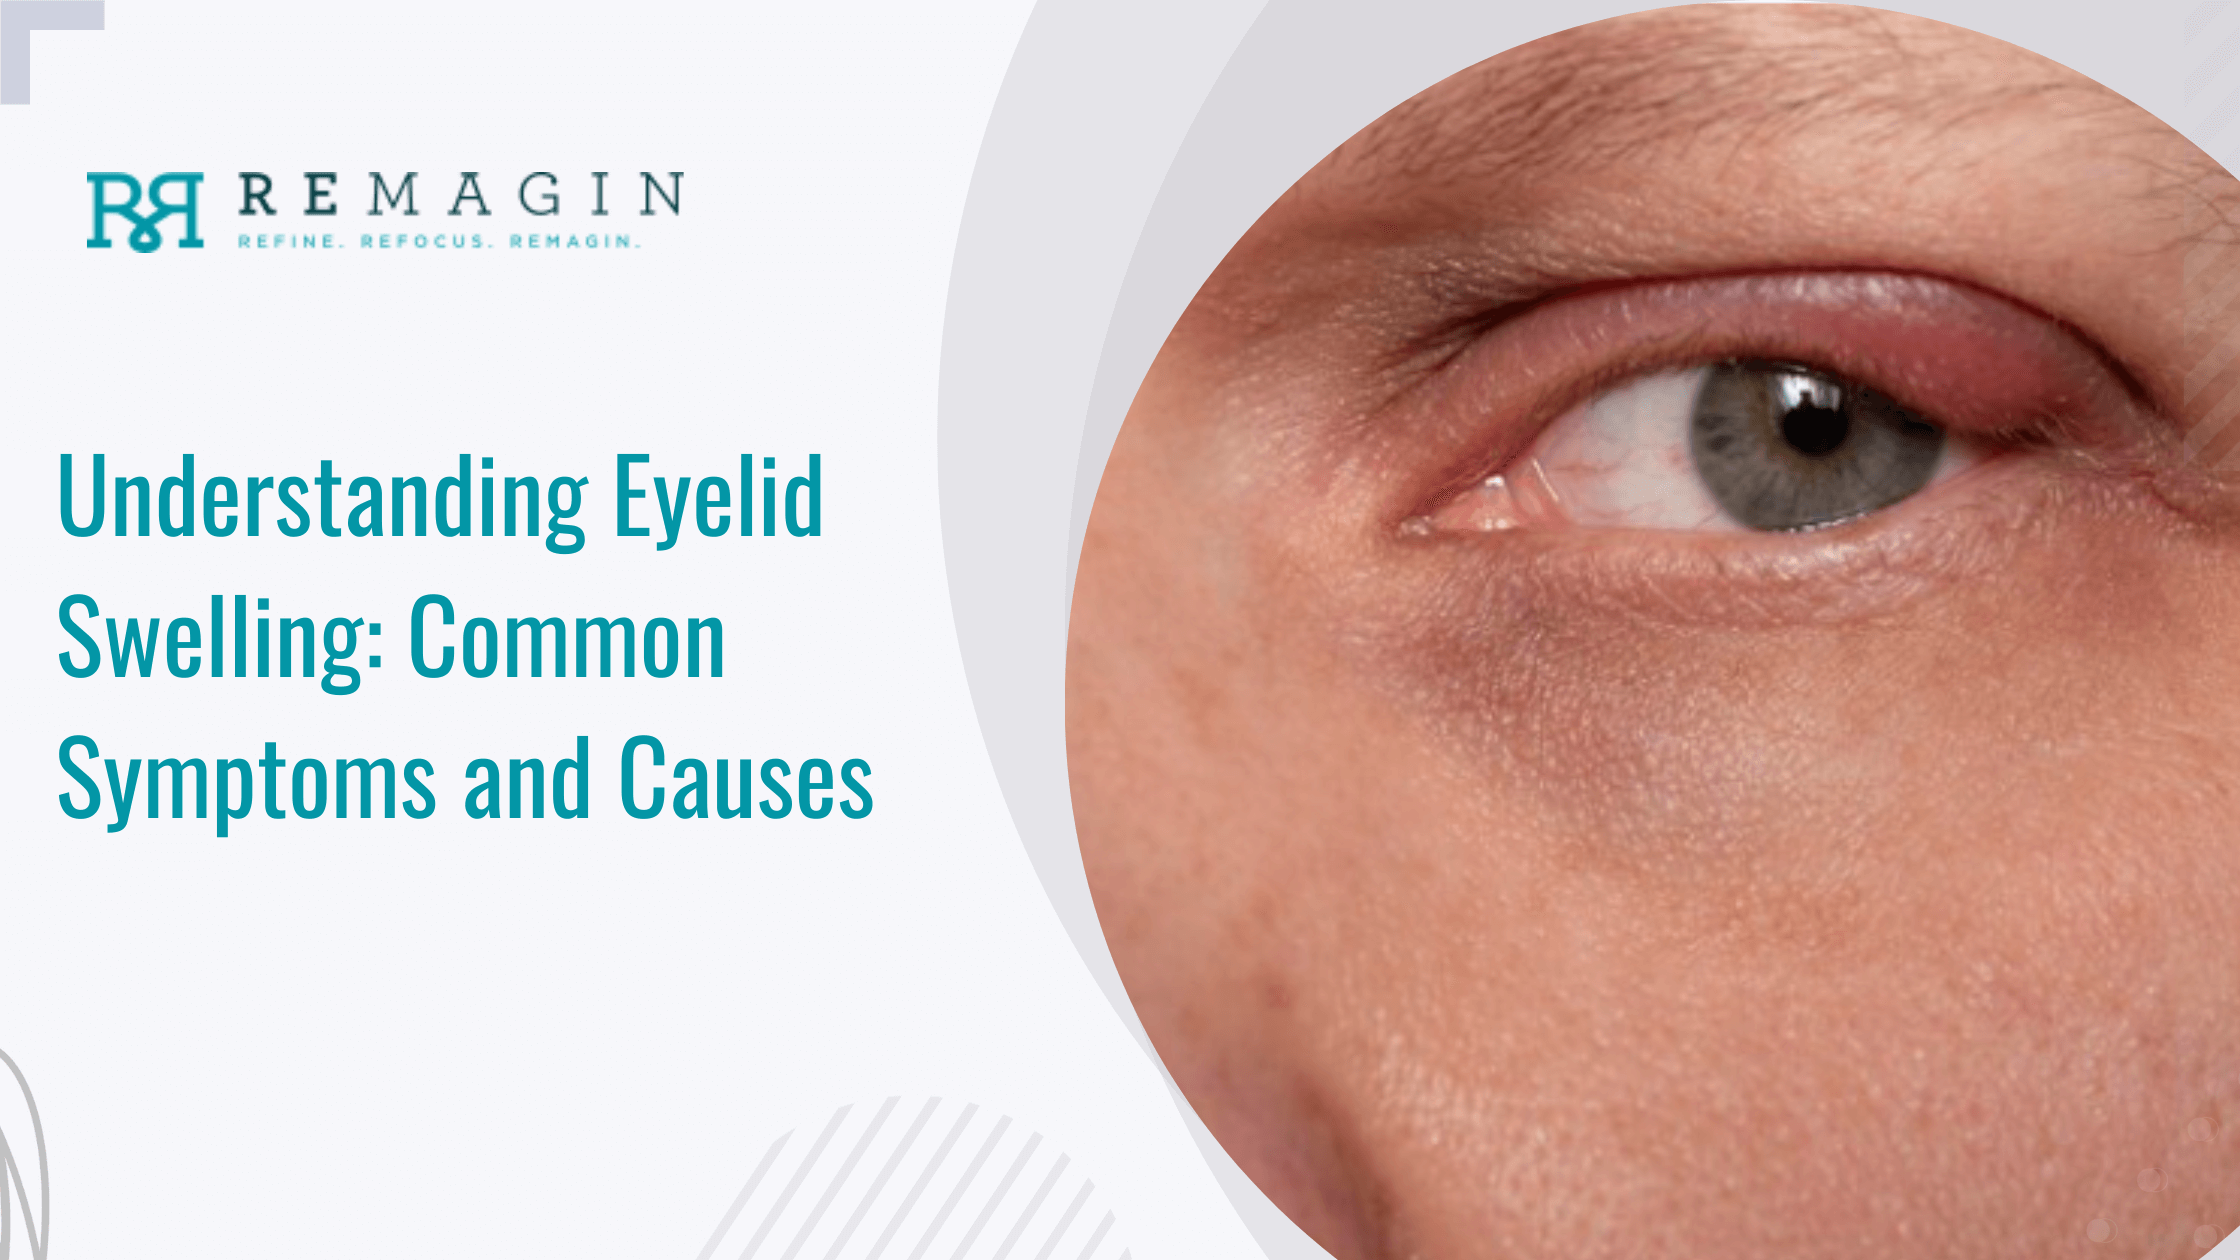 Understanding Eyelid Swelling: Common Symptoms and Causes